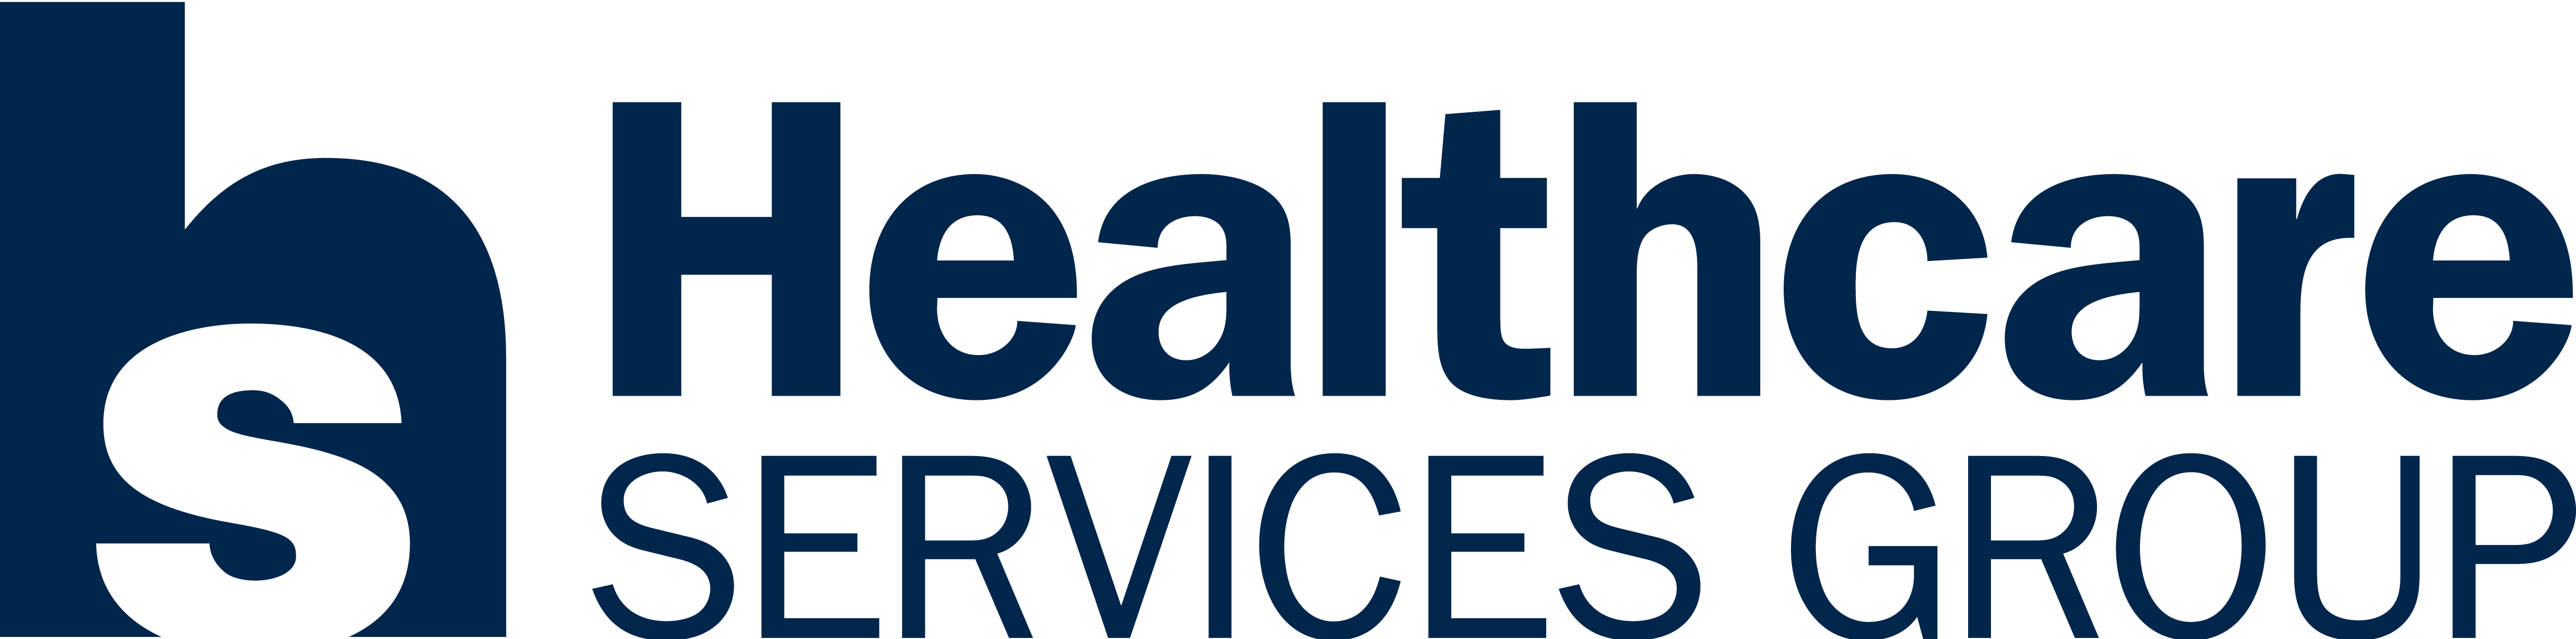 Healthcare Services Group, Inc.